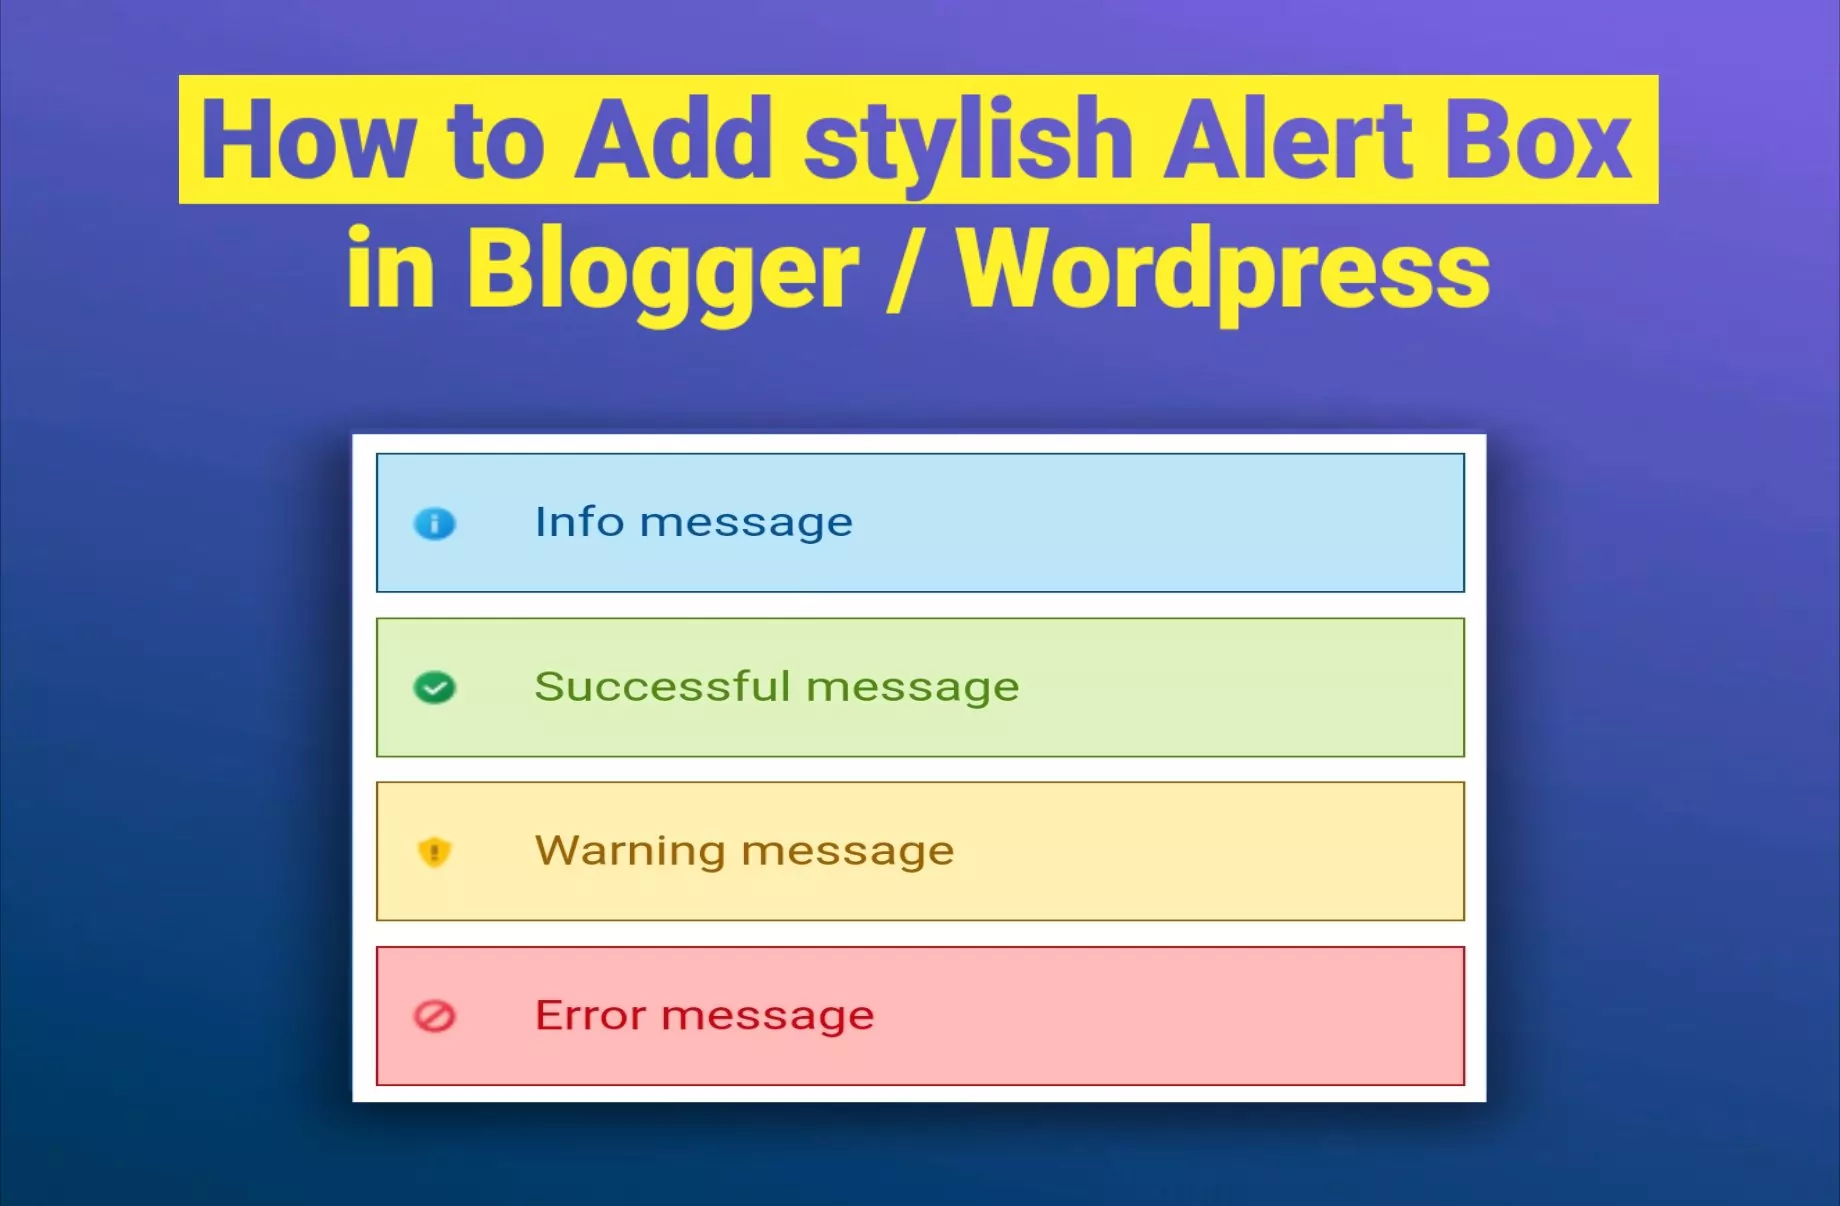 How to Add Stylish Alert Box in Blogger and WordPress